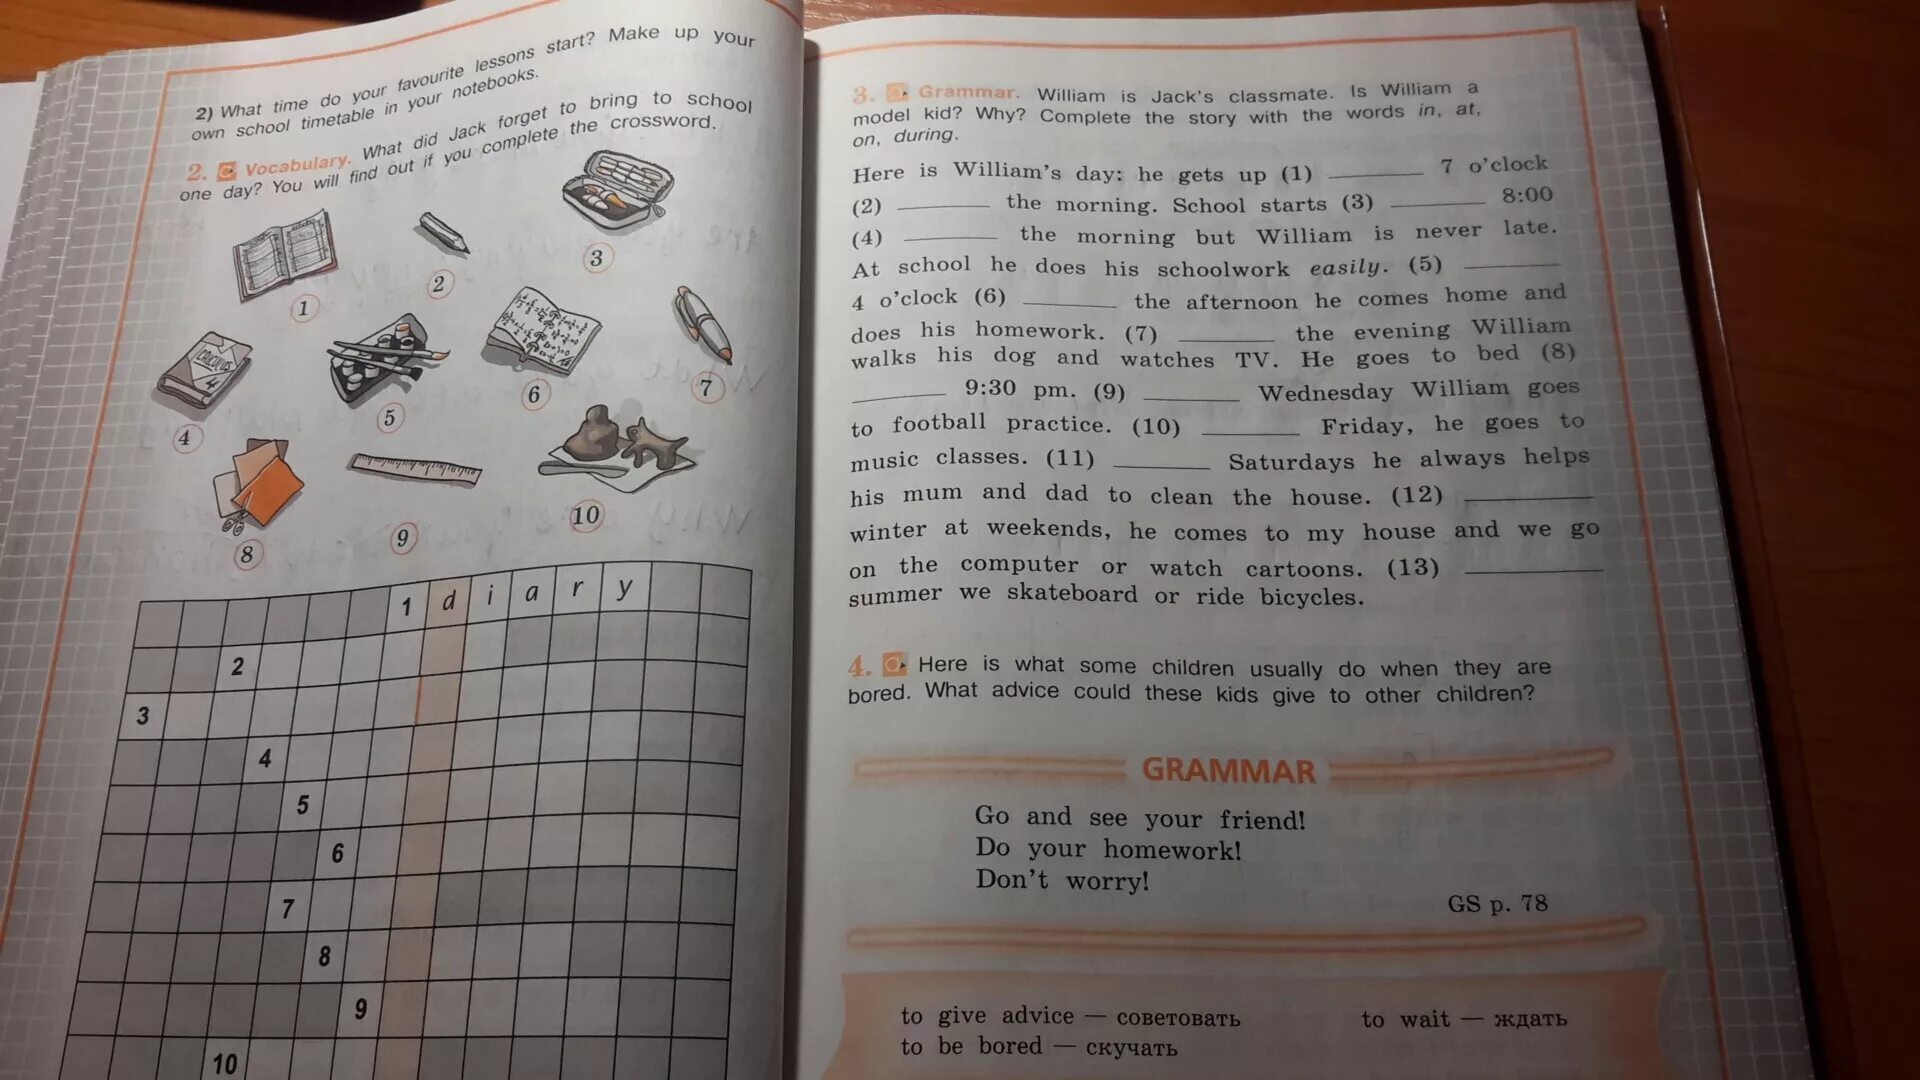 Here is what some children usually do when they are bored ответы. Английский язык 4 класс Vocabulary what did Jack forget to bring to School. Read and write in the timetable 3 класс. Complete the crossword with the Types of Houses.